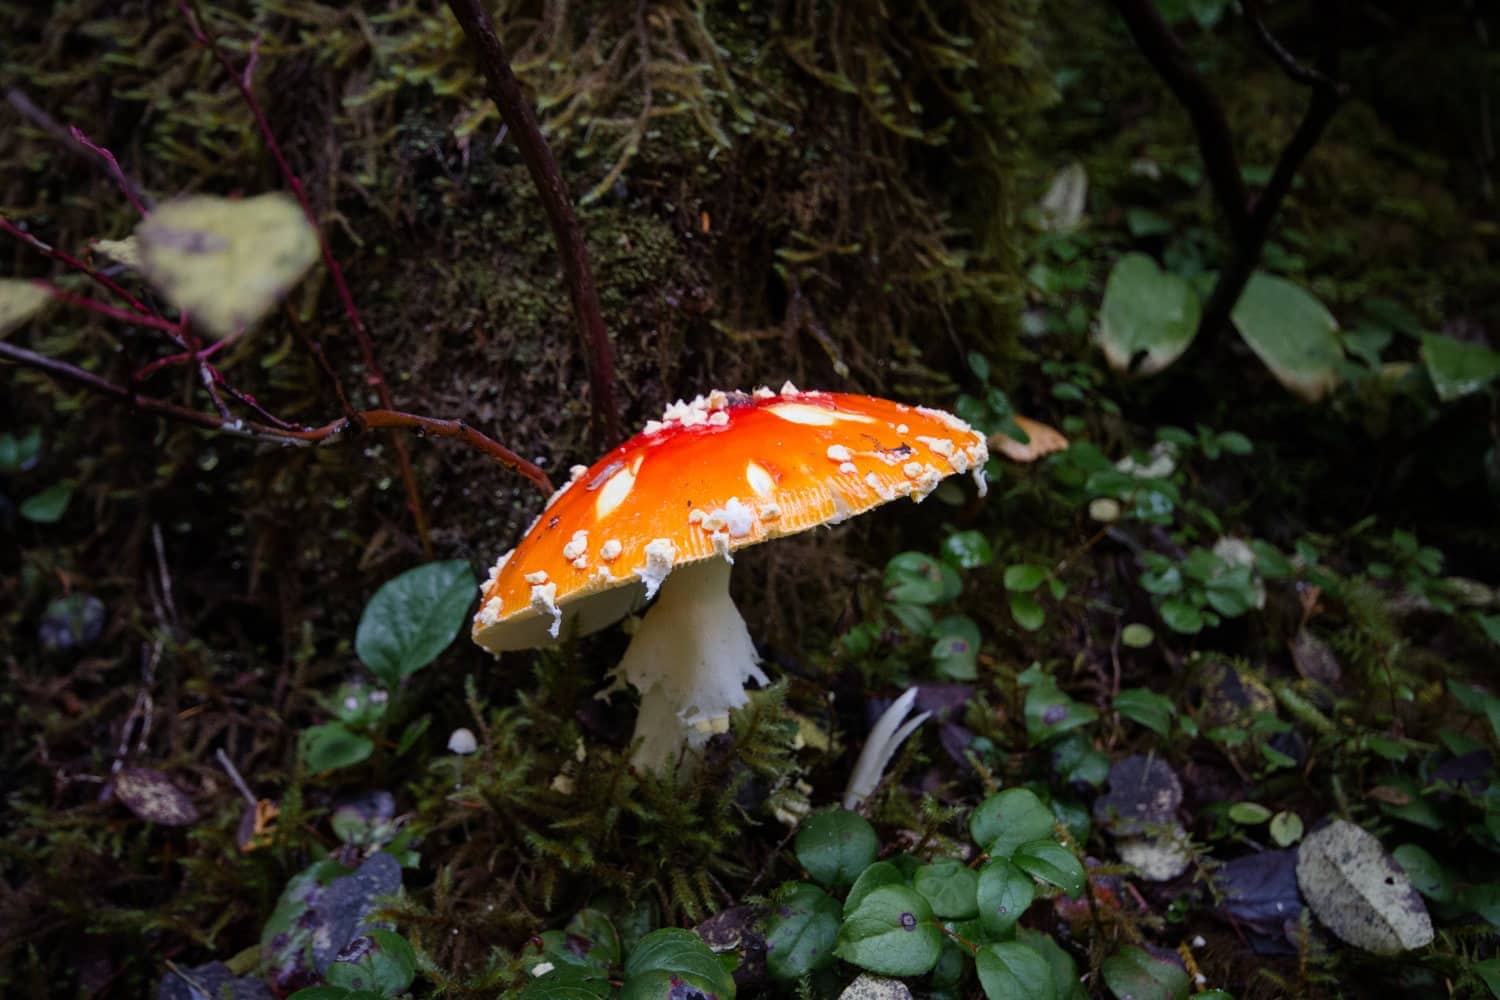 A photo of a mushroom in the woods